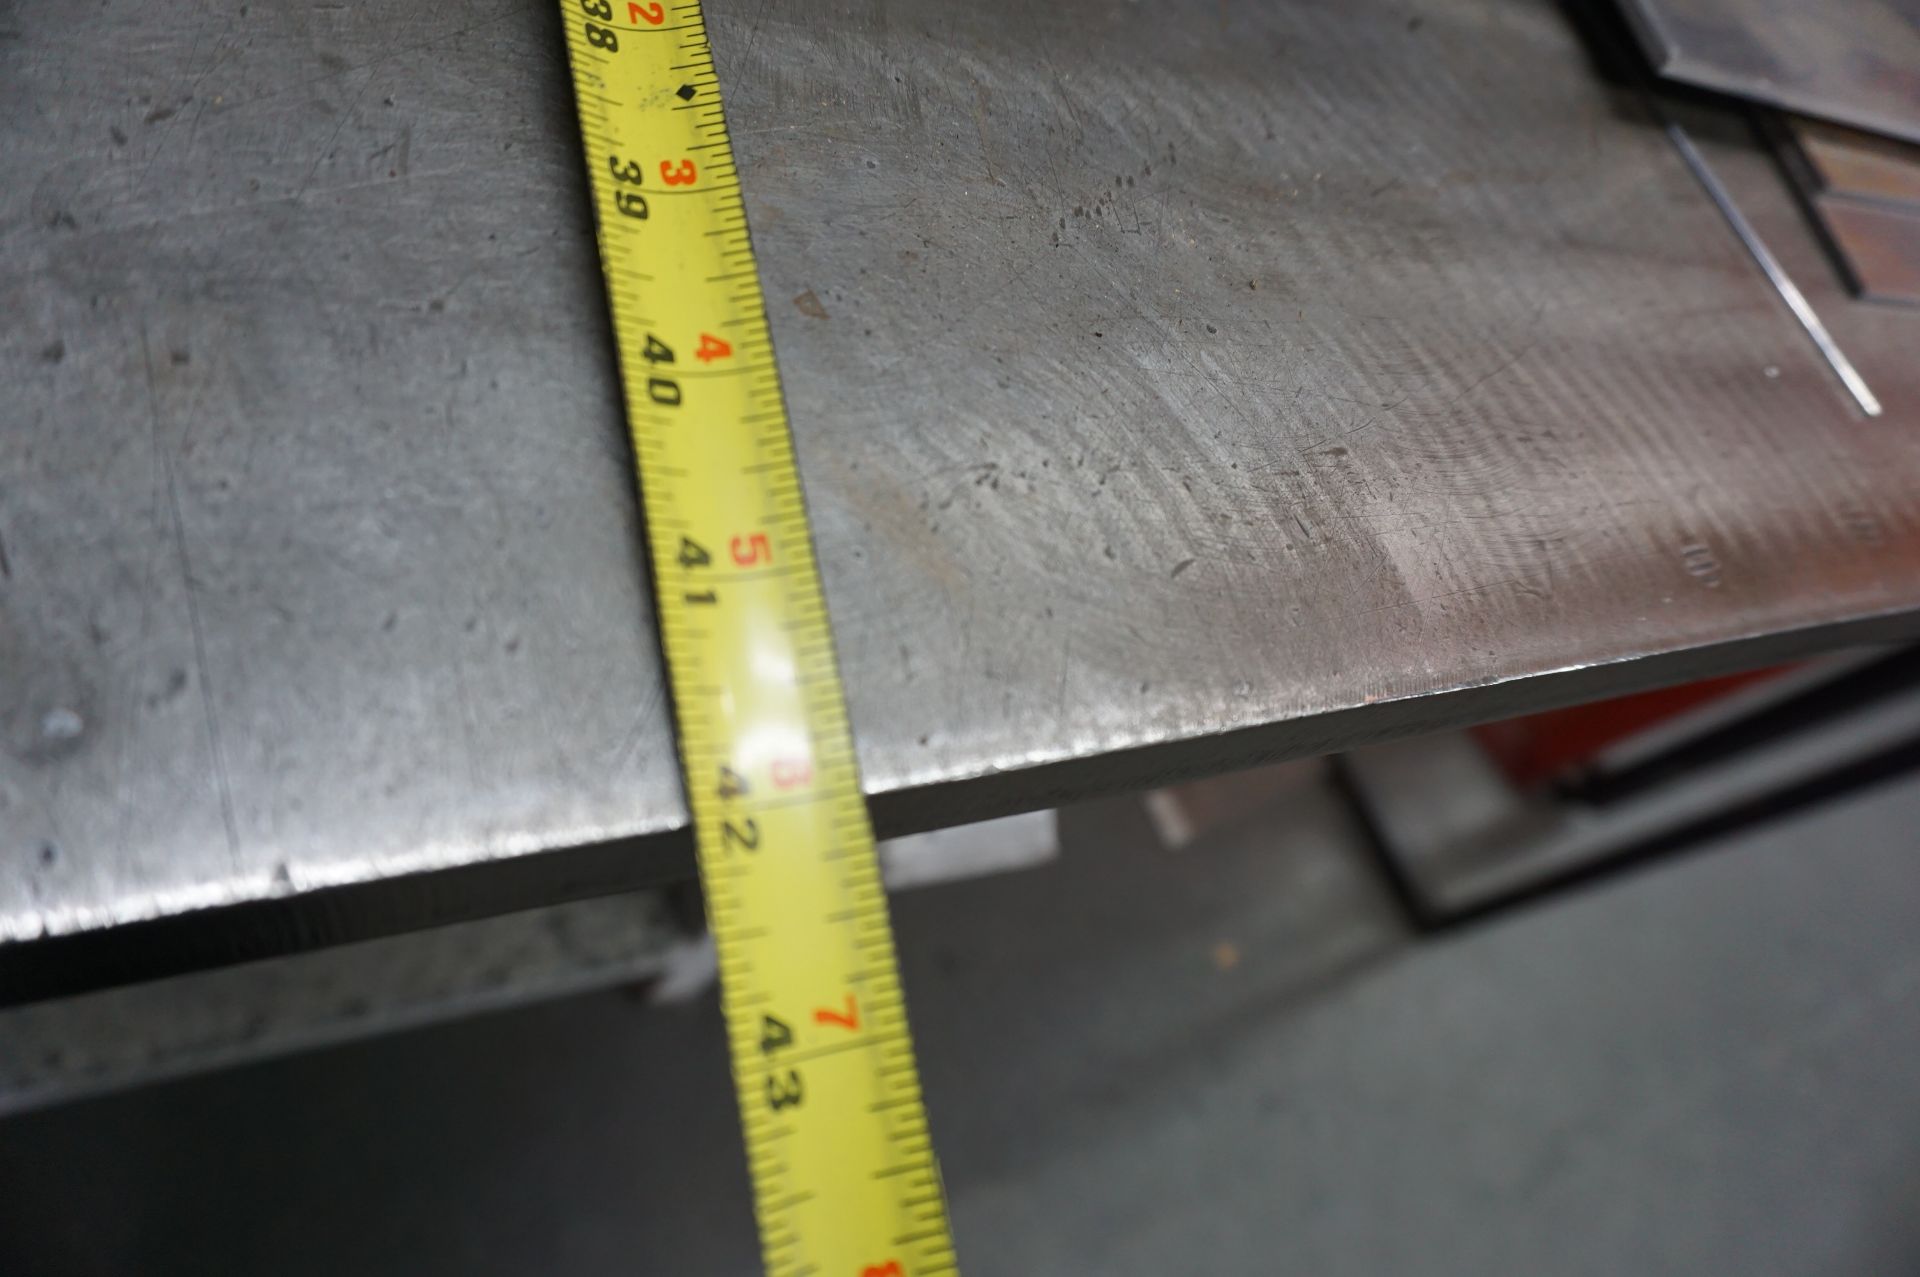 TABLE USED FOR TIG WELDING. 42" X 72" WORKING AREA, 1" THICK HEAVY STEEL TOP, 35" H, NO CONTENTS - Image 3 of 6